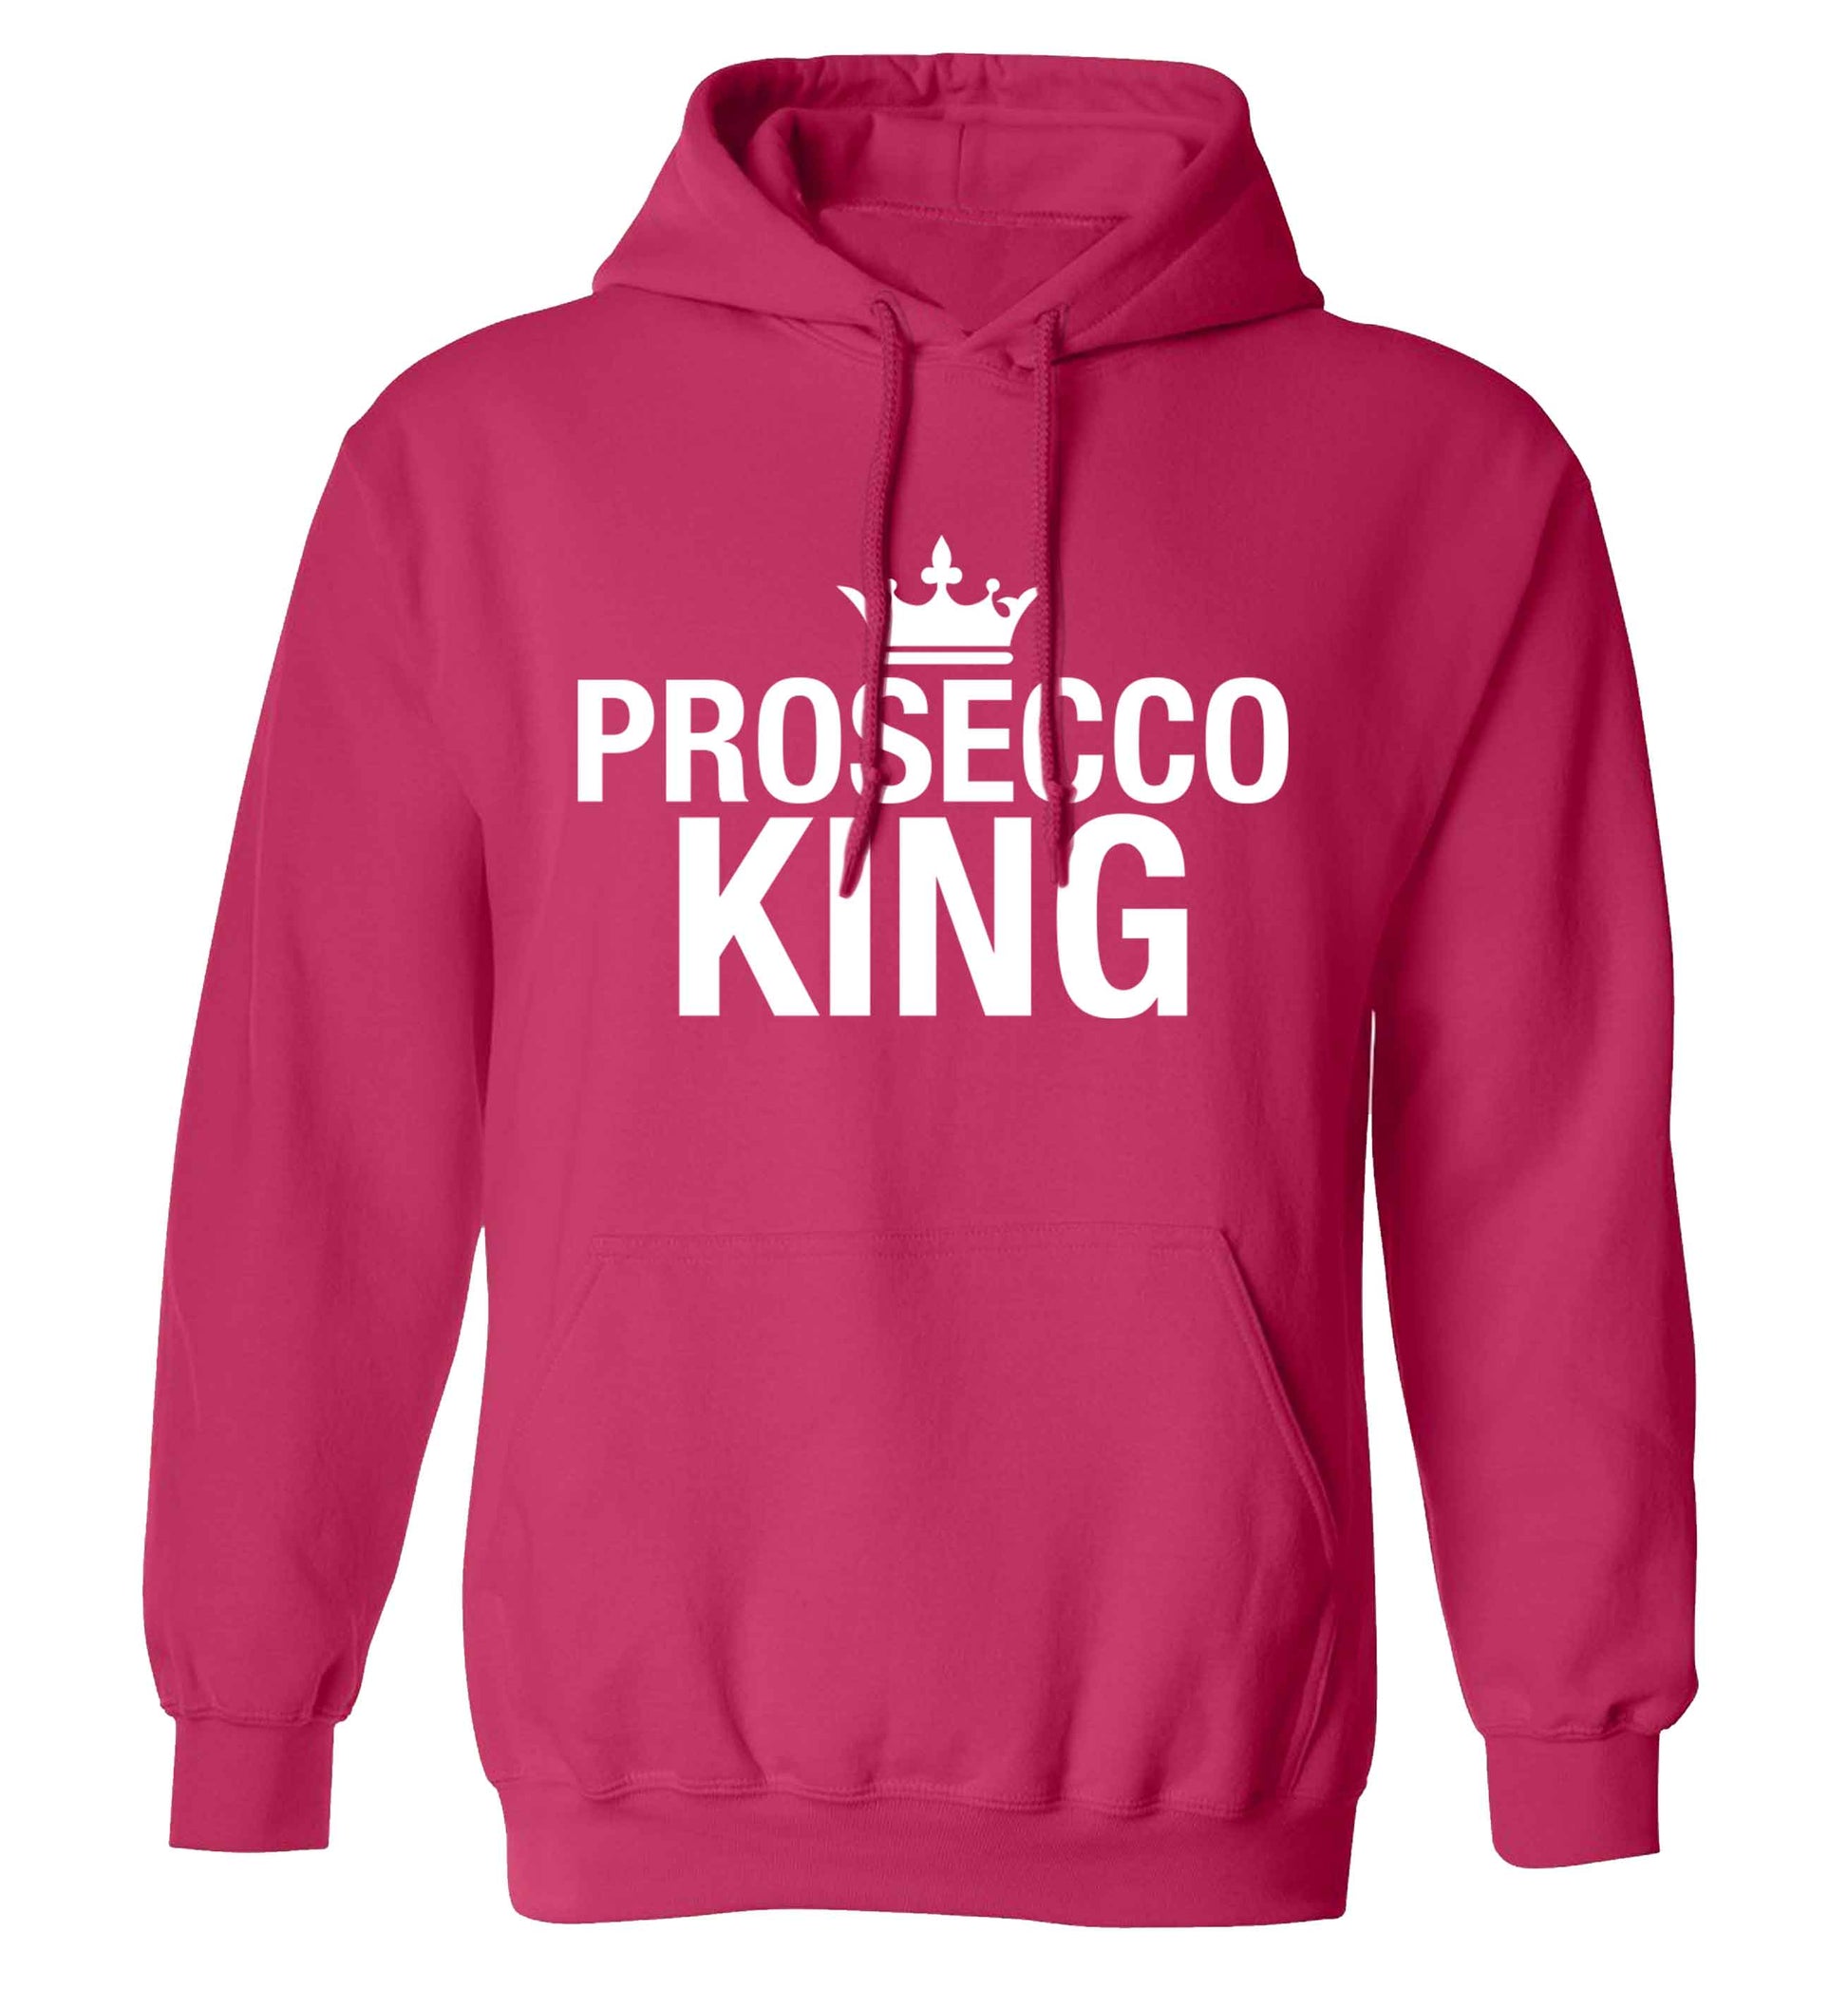 Prosecco king adults unisex pink hoodie 2XL